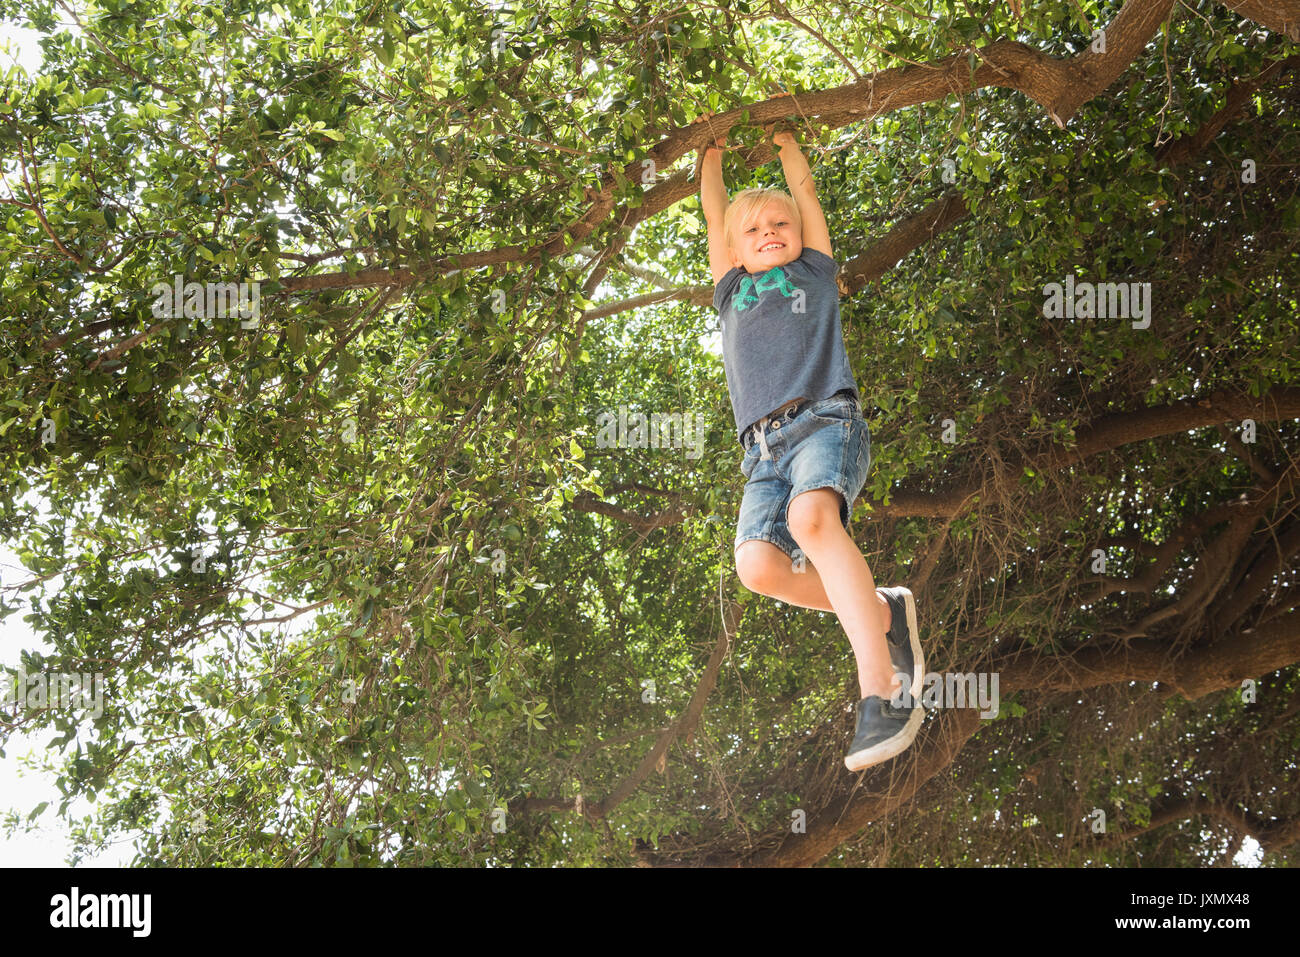 Boy hanging from tree branch looking at camera smiling Stock Photo